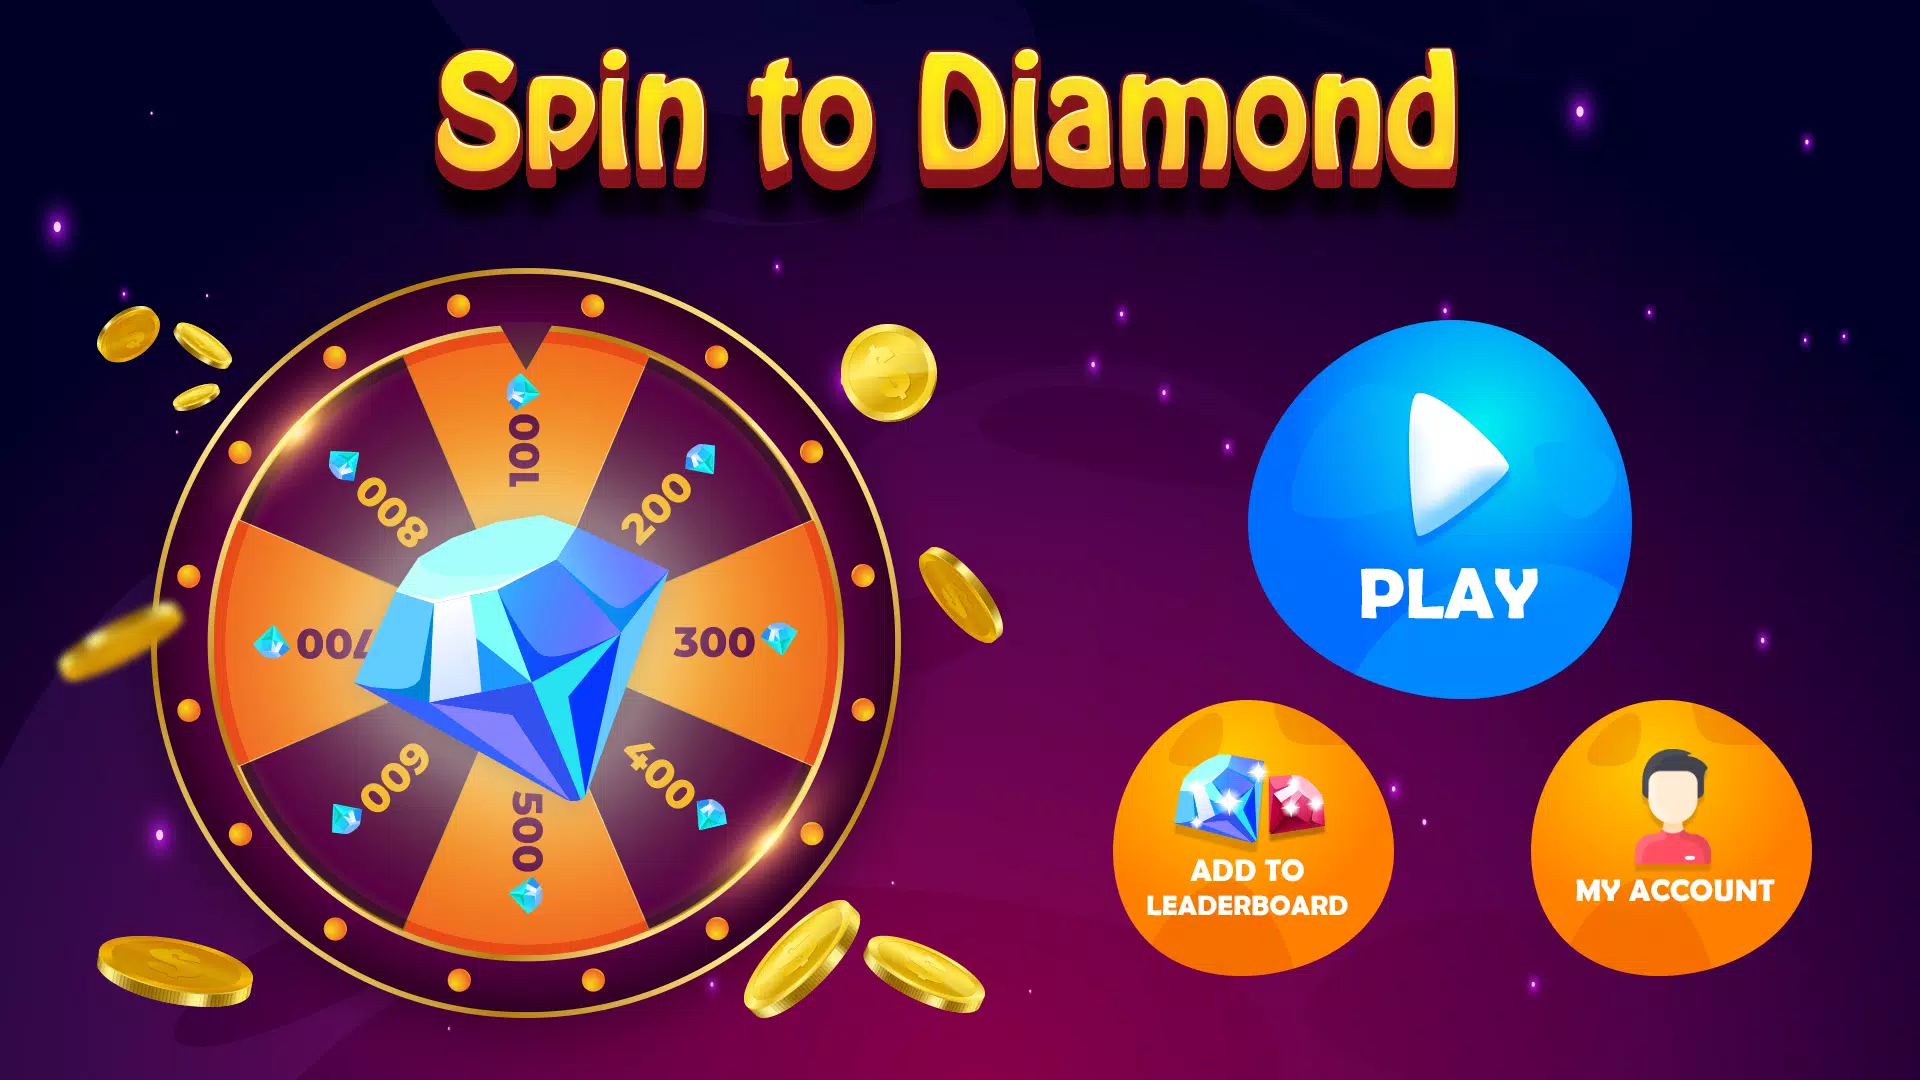 Diamond spin. Lucky Spin. To Spin. COINPOKER Cosmic Spin Table. Spin by oxxo.